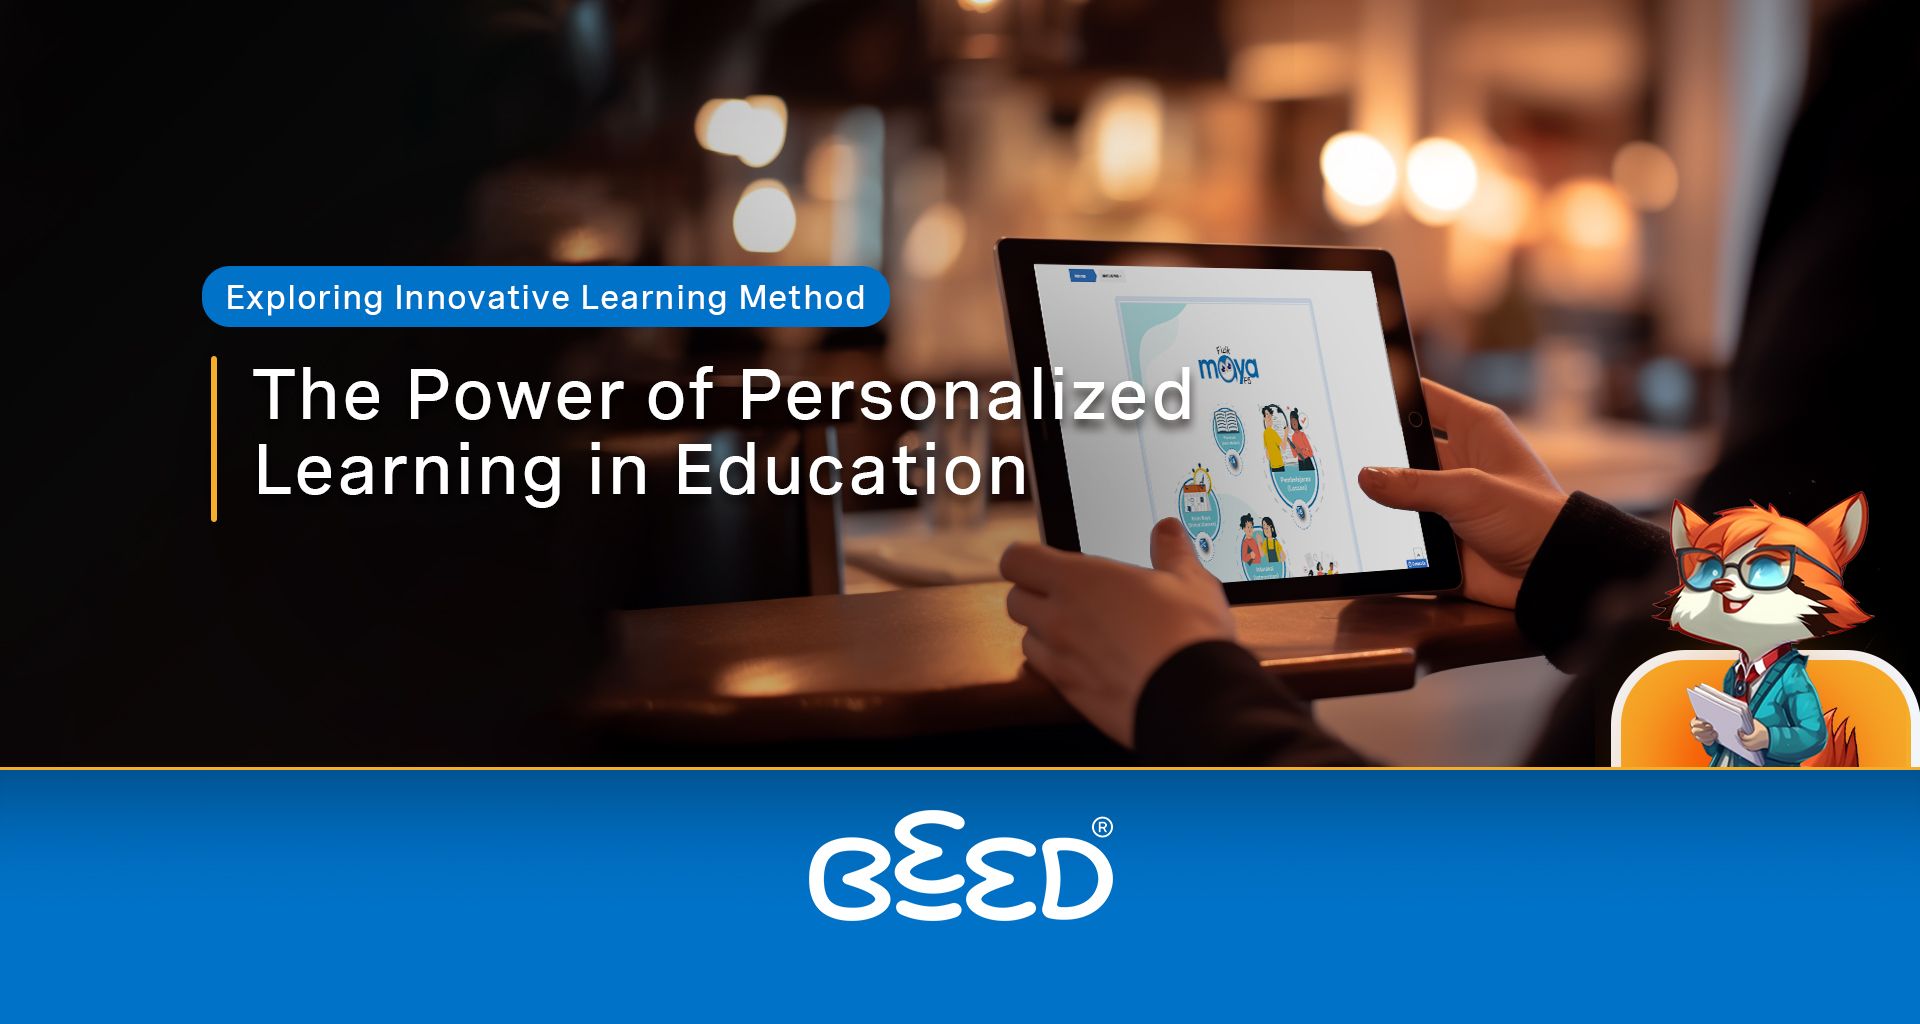 The Power of Personalized Learning in Education